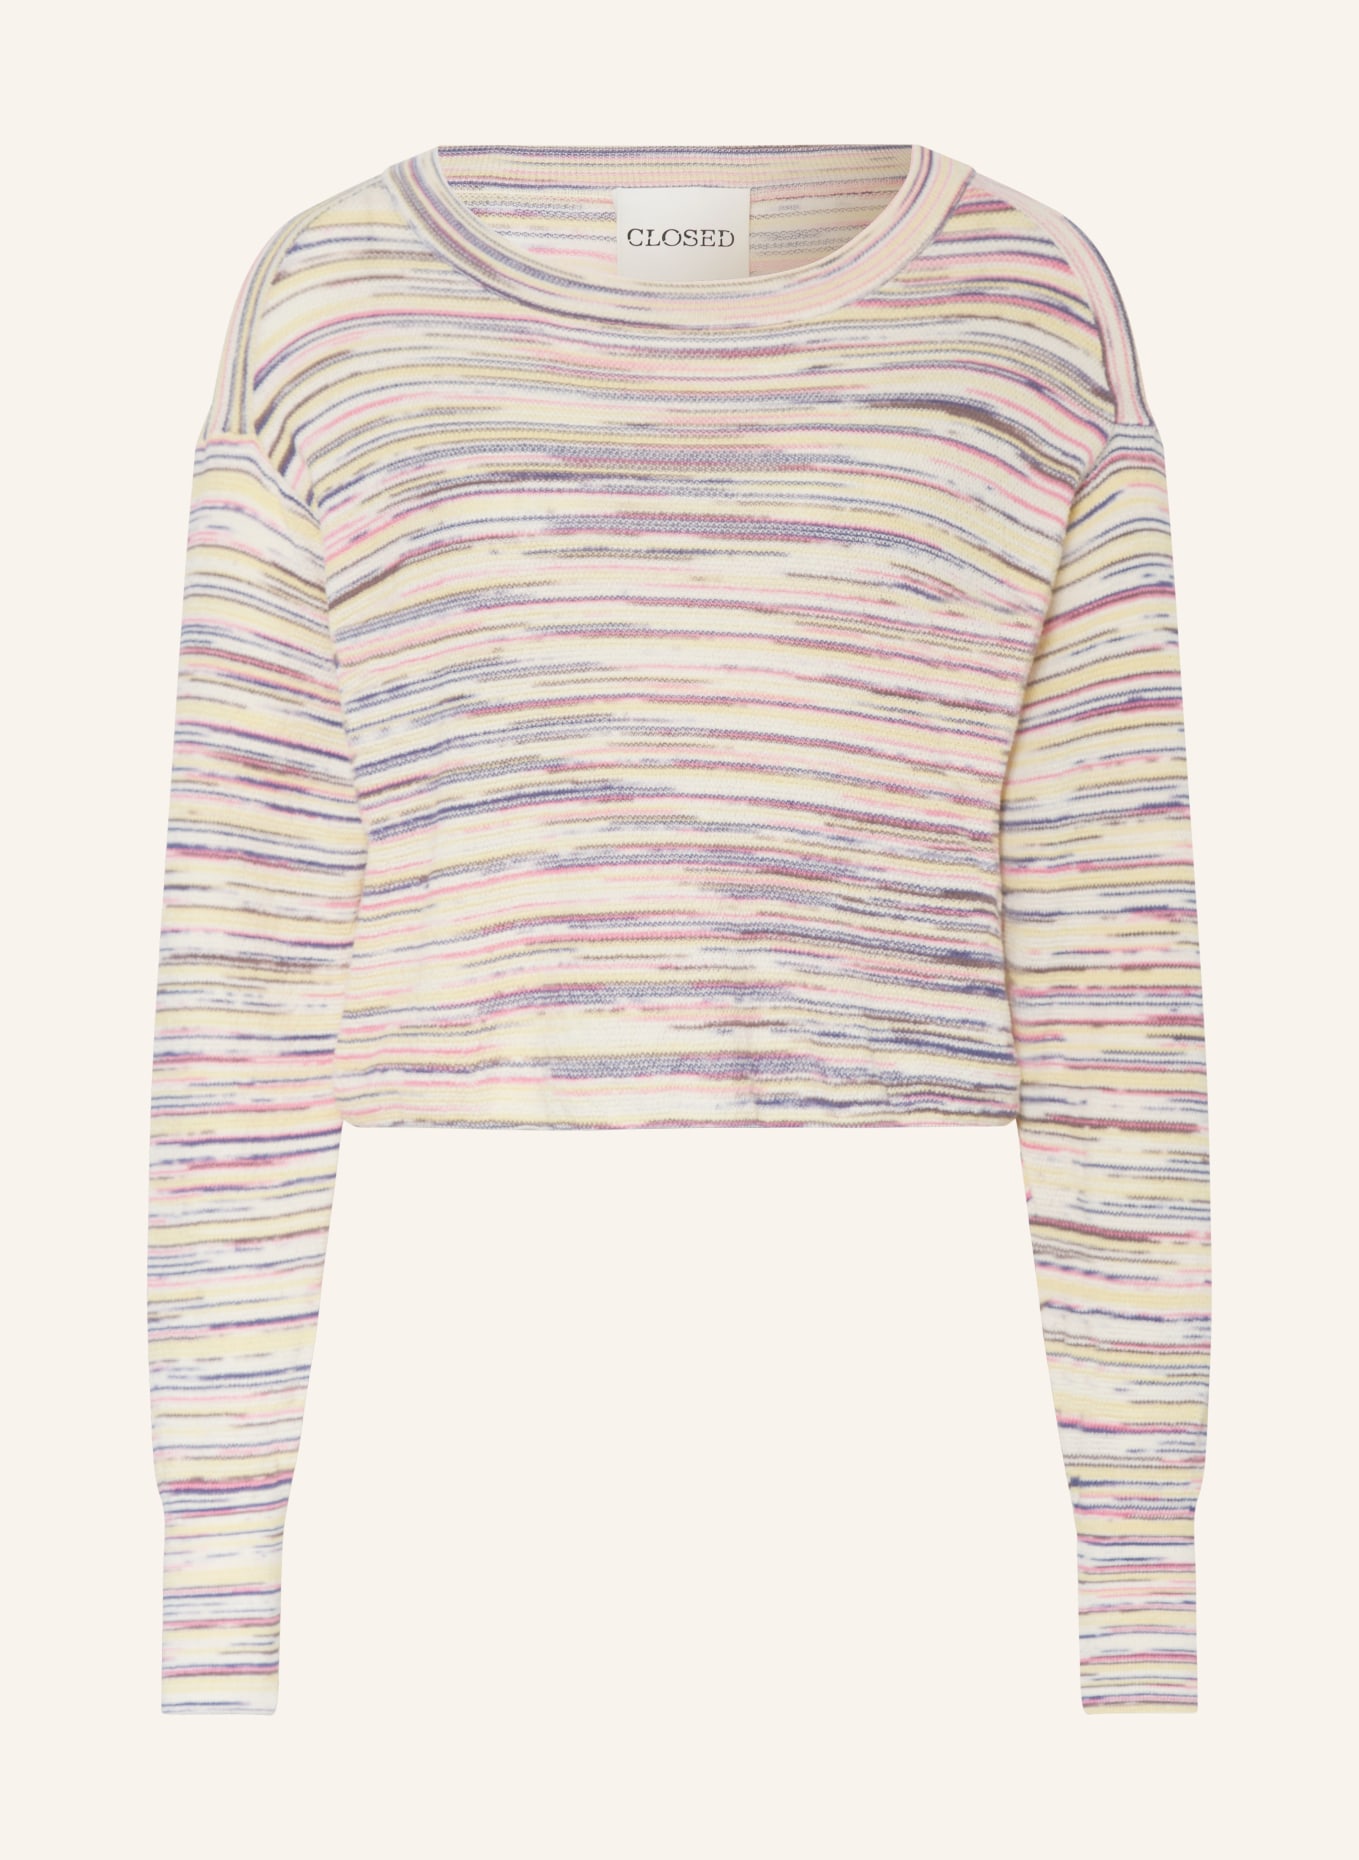 CLOSED Sweater, Color: PINK/ BLUE/ LIGHT YELLOW (Image 1)